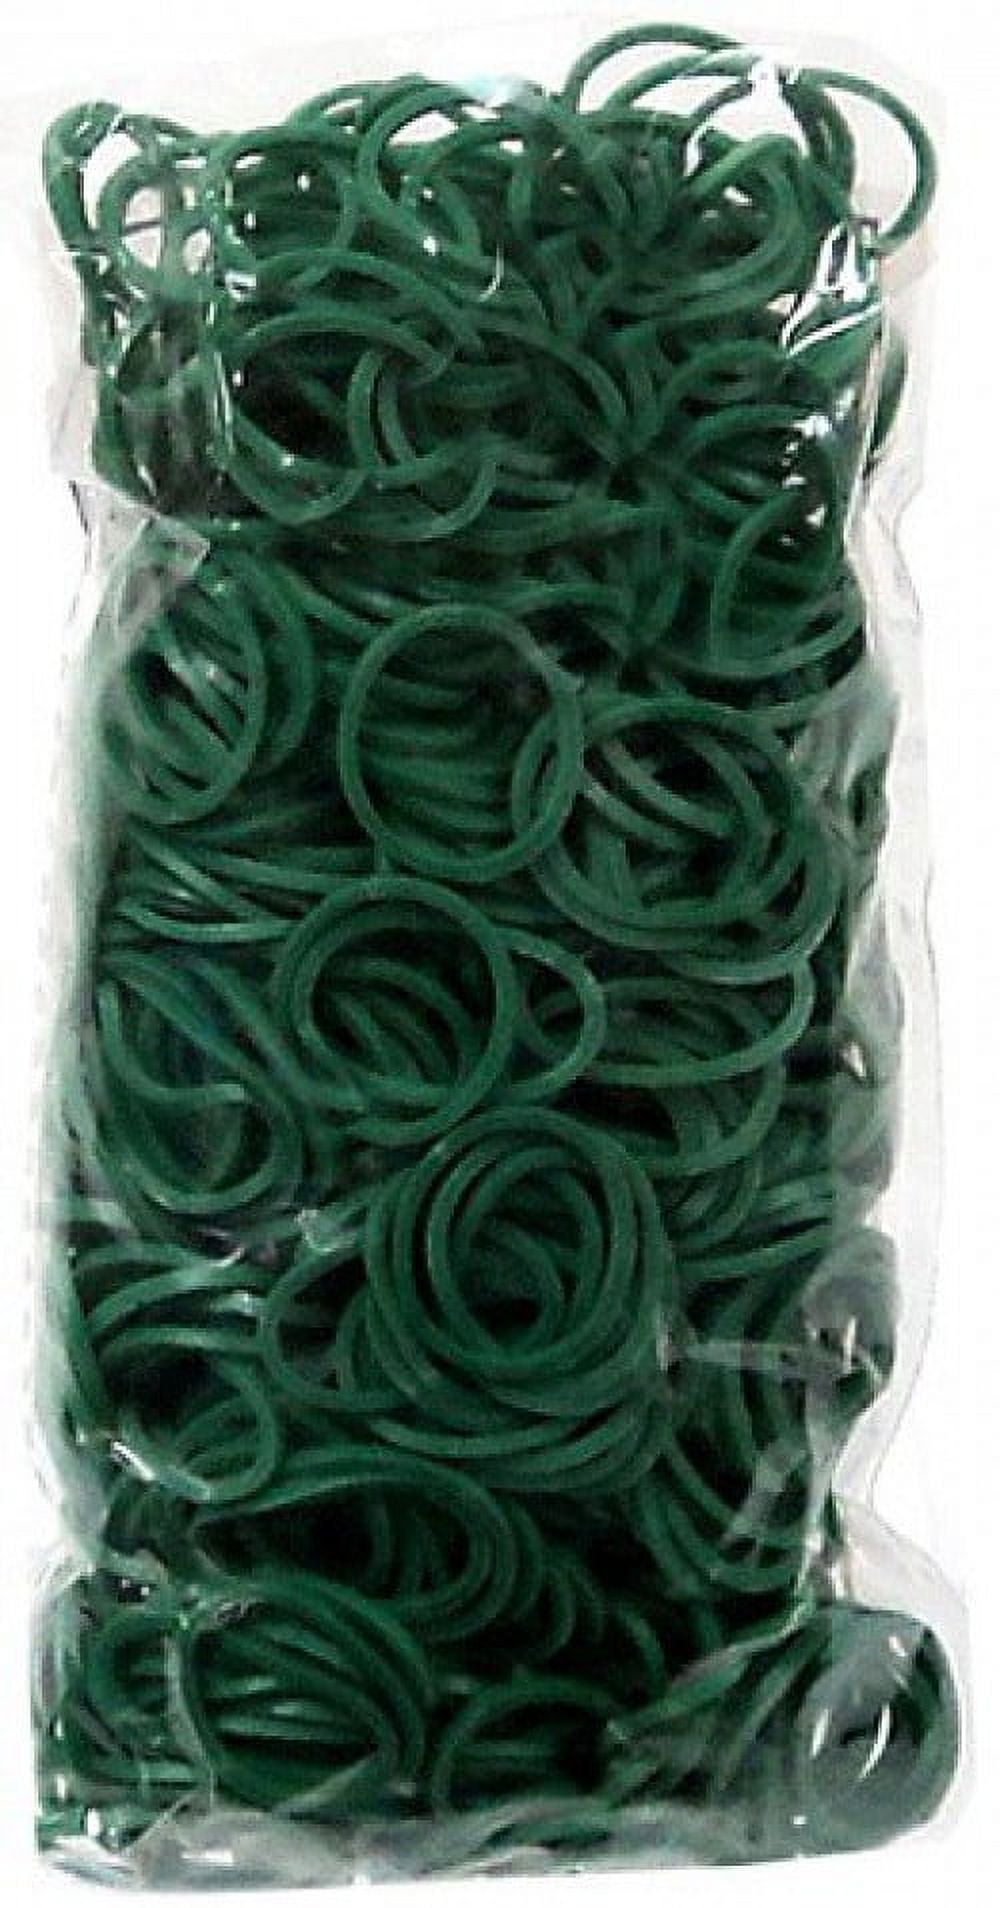 Rainbow Loom Dark Green Rubber Bands Refill Pack (600 ct) 